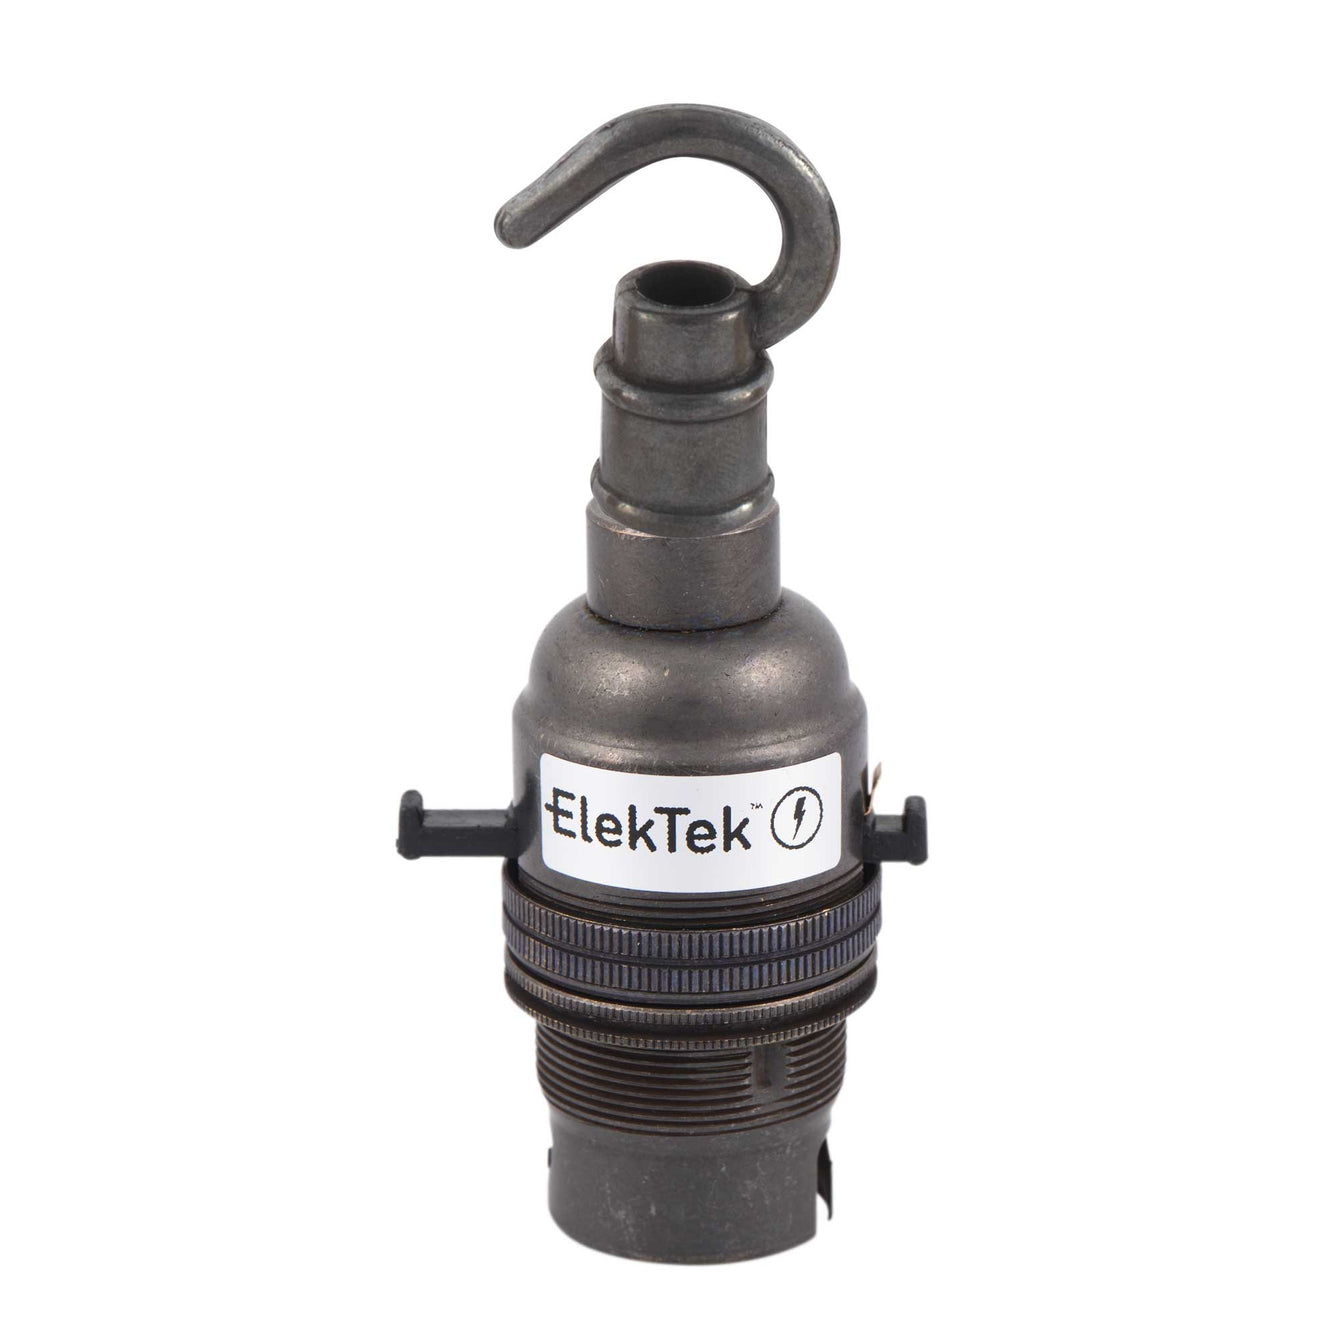 ElekTek Patented Safety Switch Lamp Holder Half Inch Bayonet Cap B22 With Shade Ring and Hook Solid Brass 